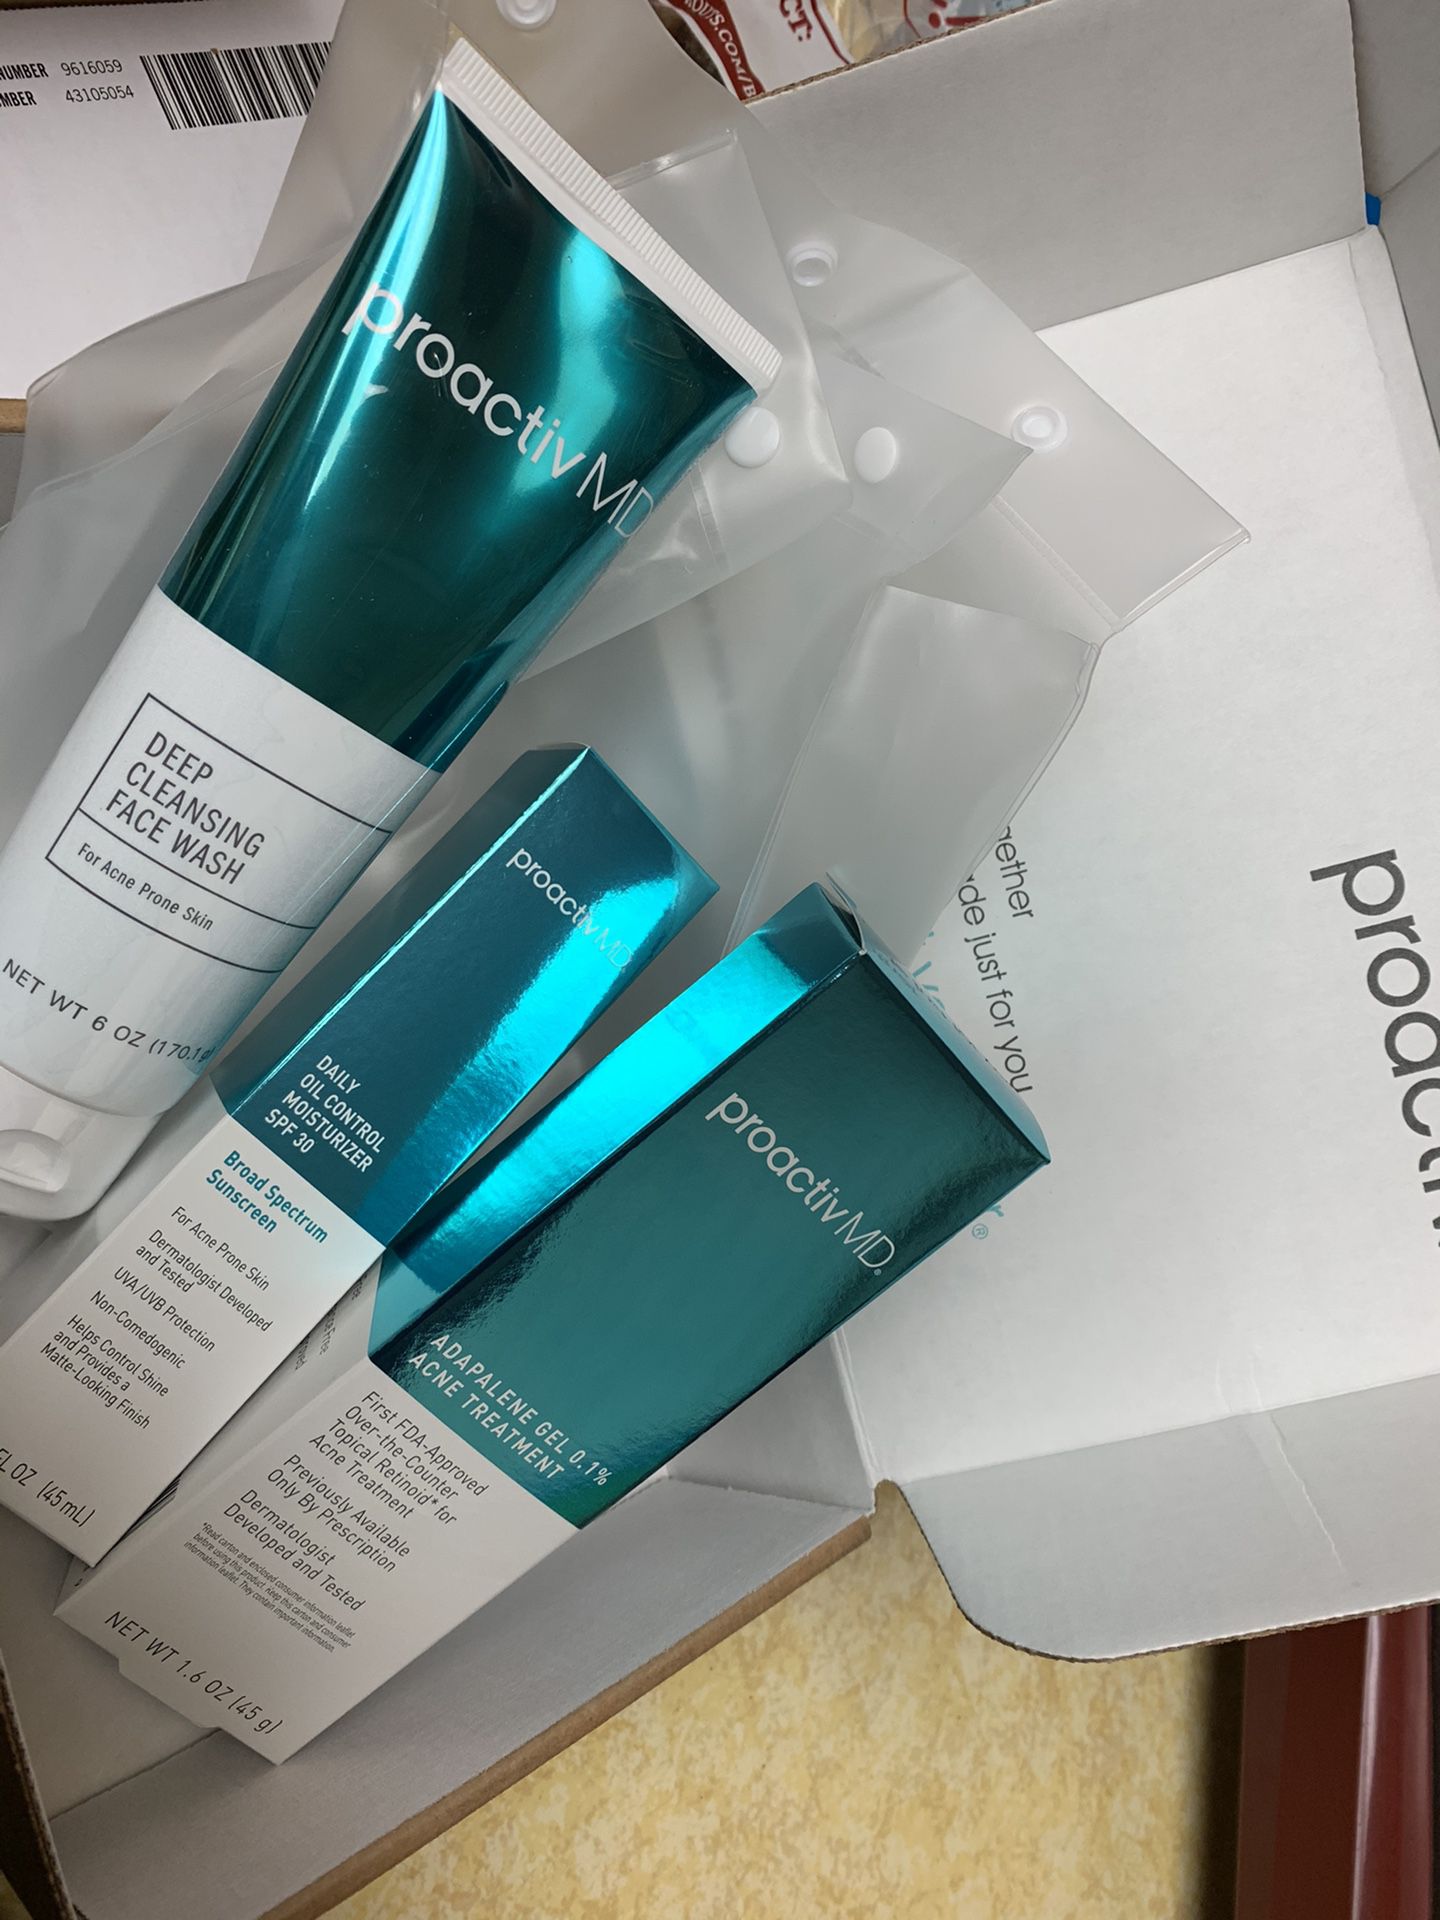 Proactiv brand new boxes